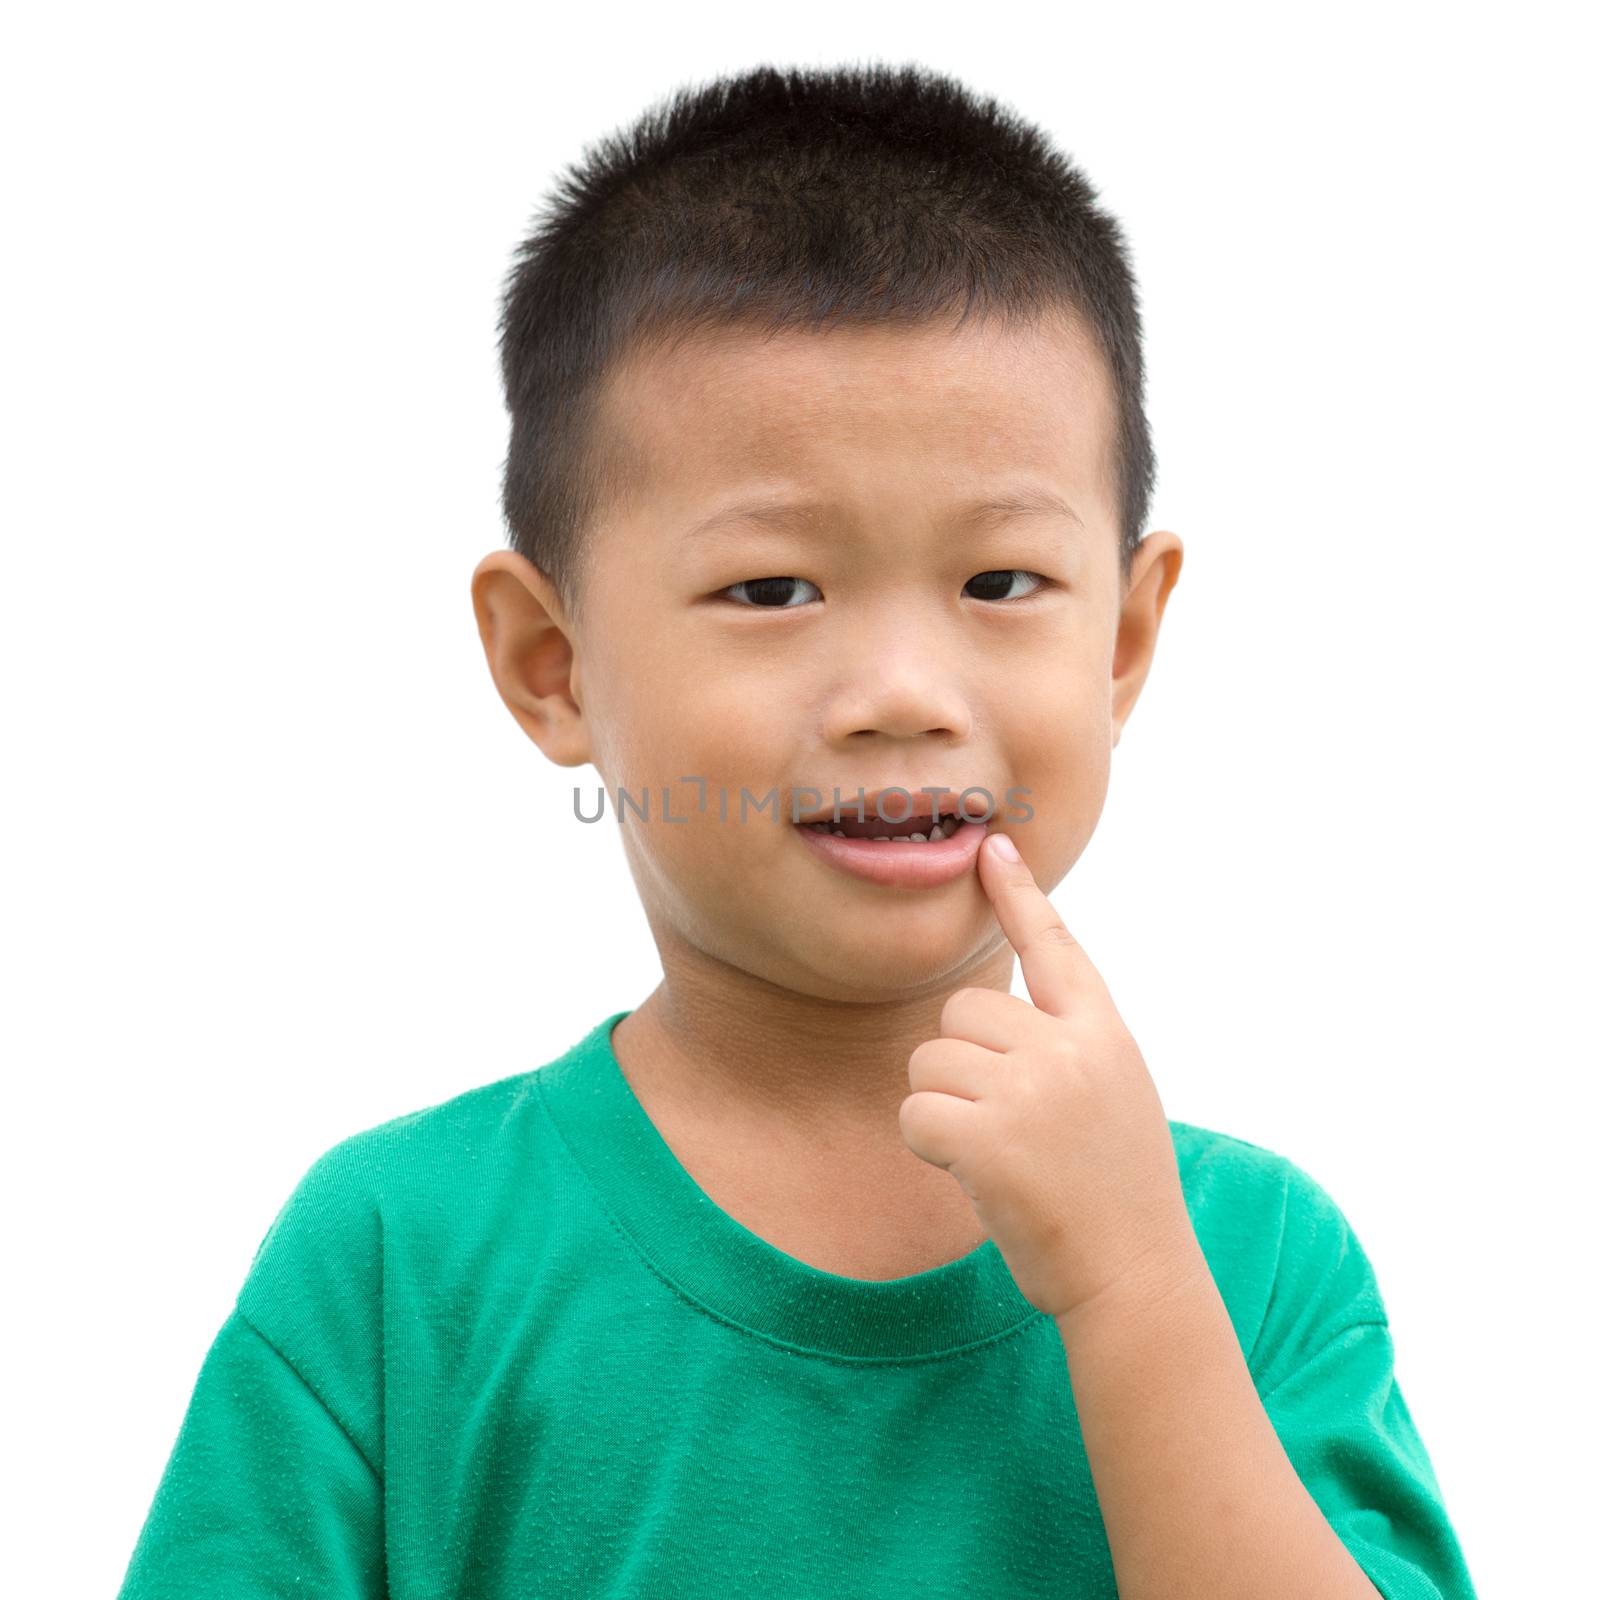 Happy Asian child pointing his mouth and smiling. Portrait of young boy showing body parts isolated on white background.